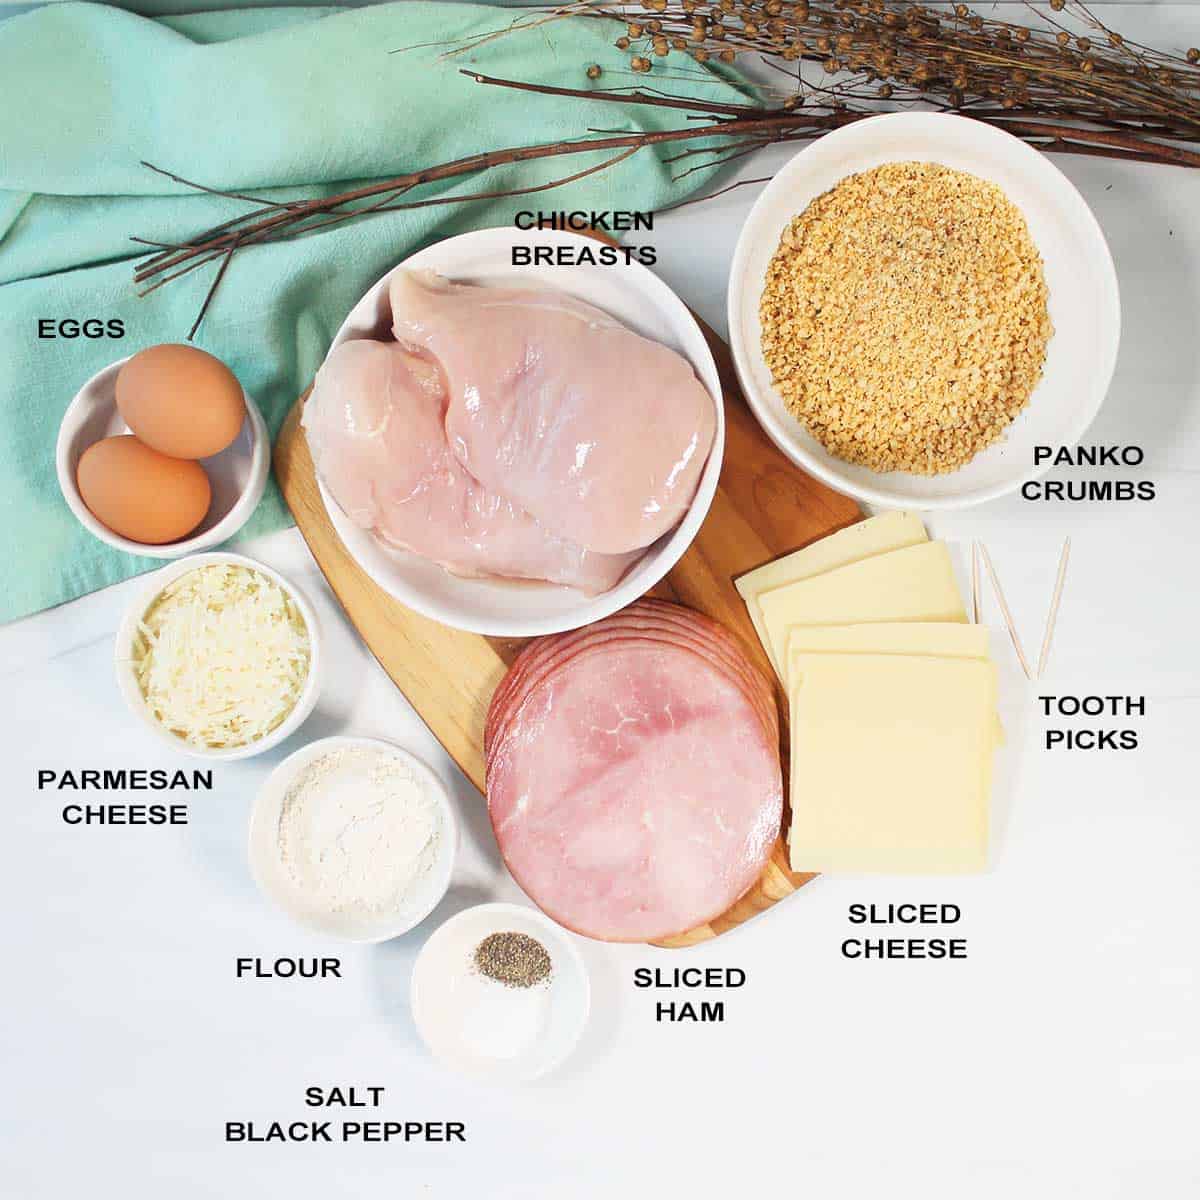 Ingredients for stuffed chicken breasts.